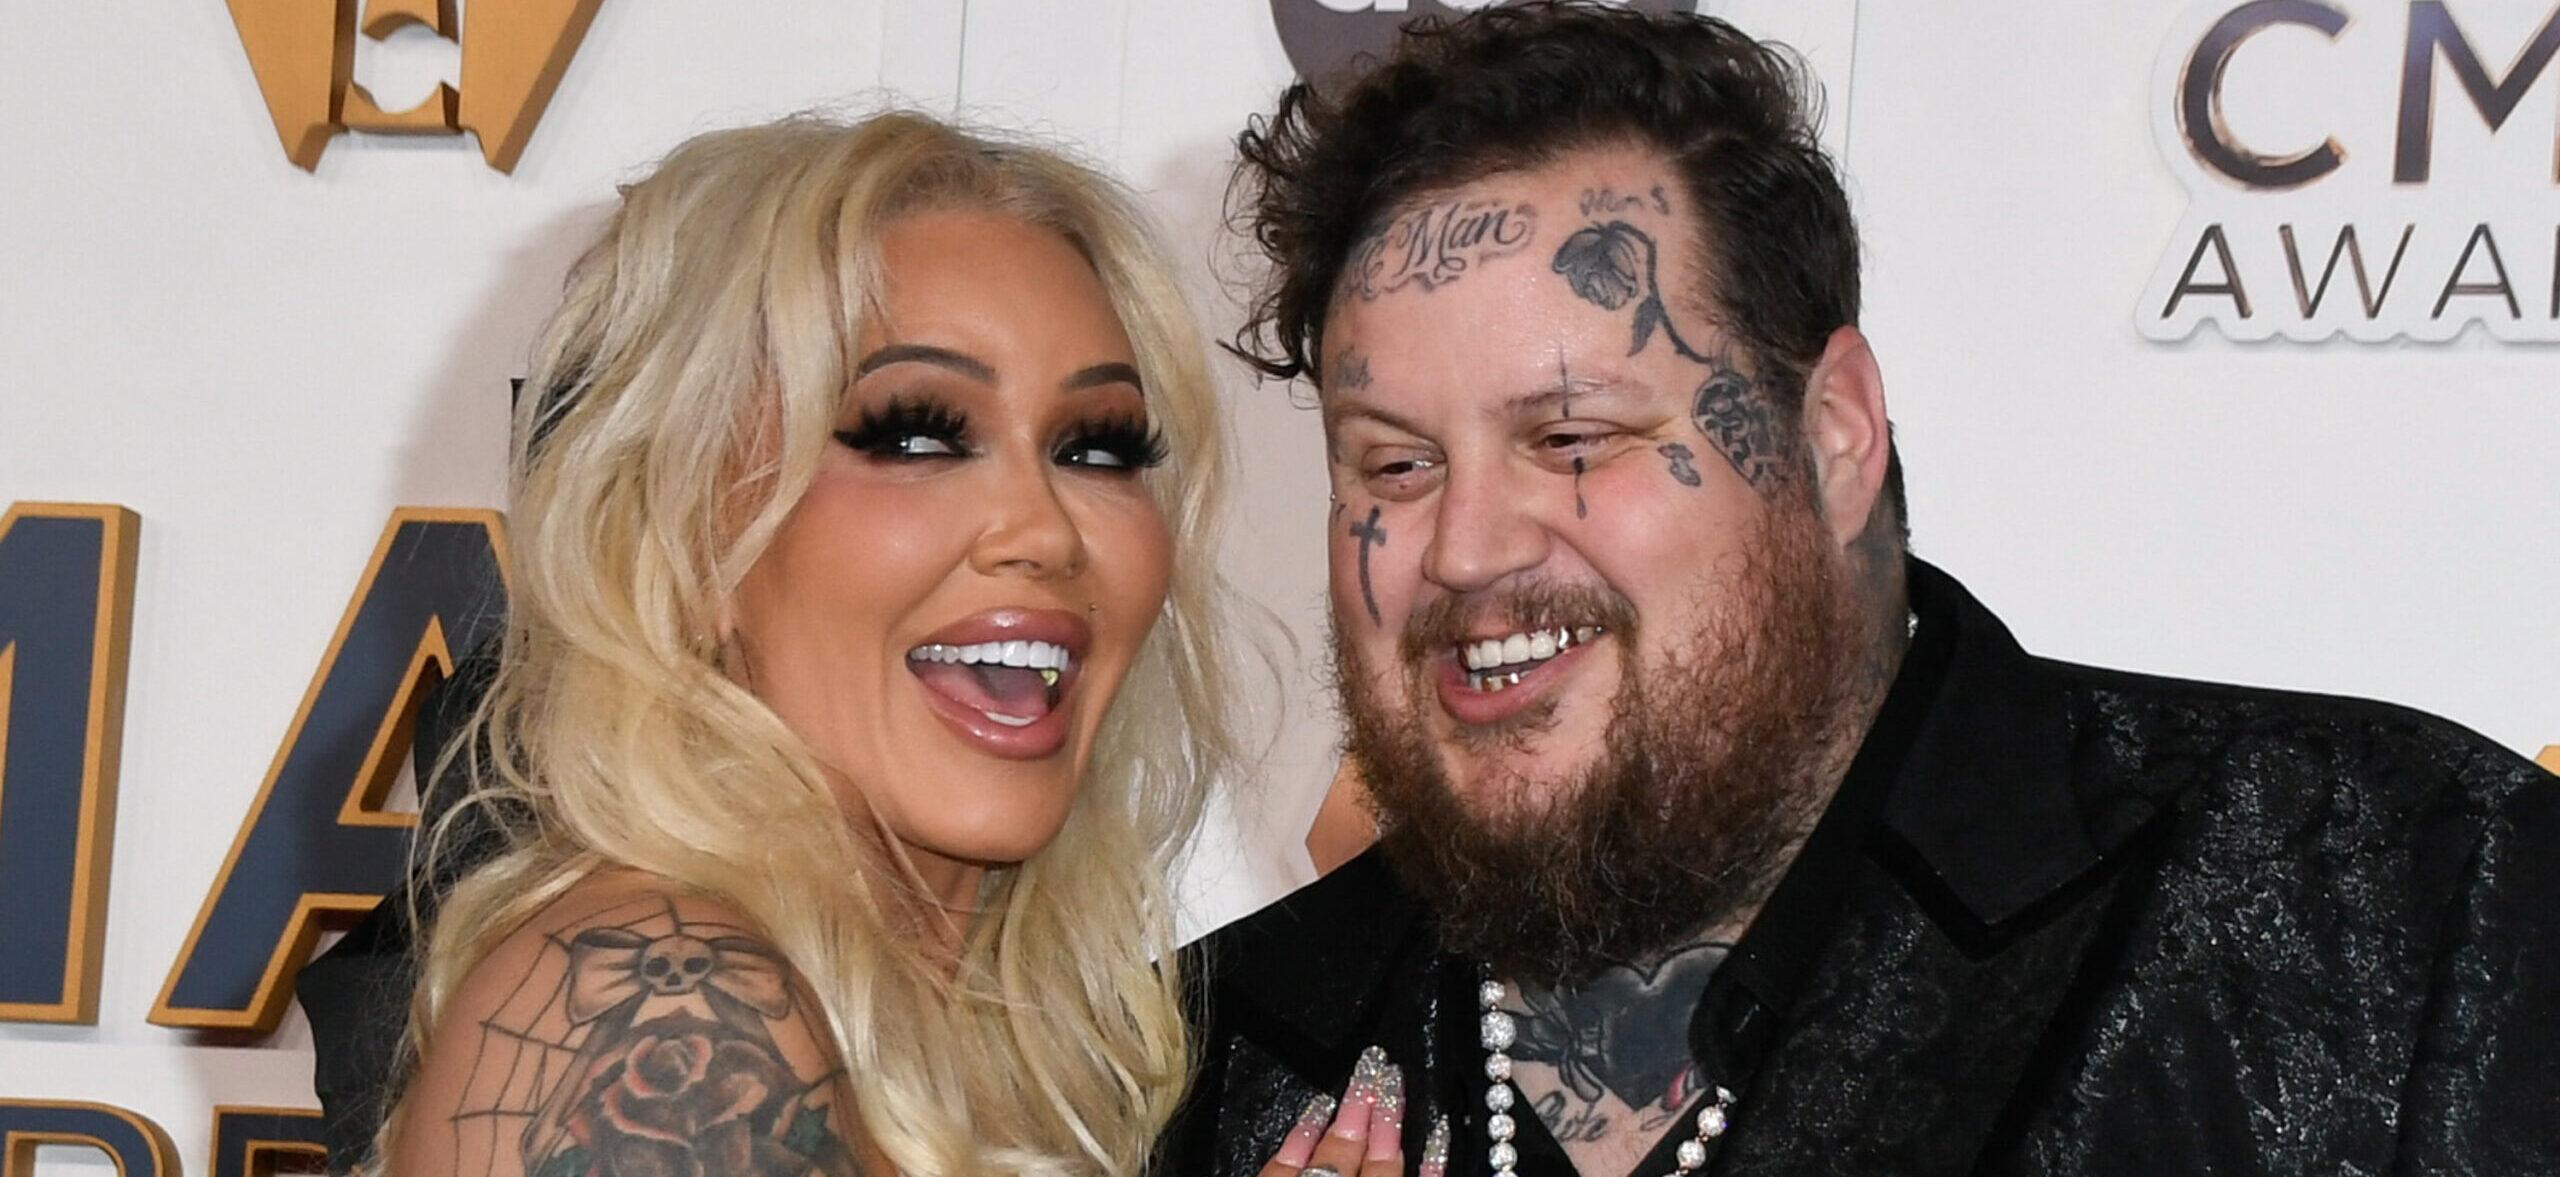 Jelly Roll’s Wife Bunnie XO Inspire Fans With First Anniversary Away From Adult Entertainment